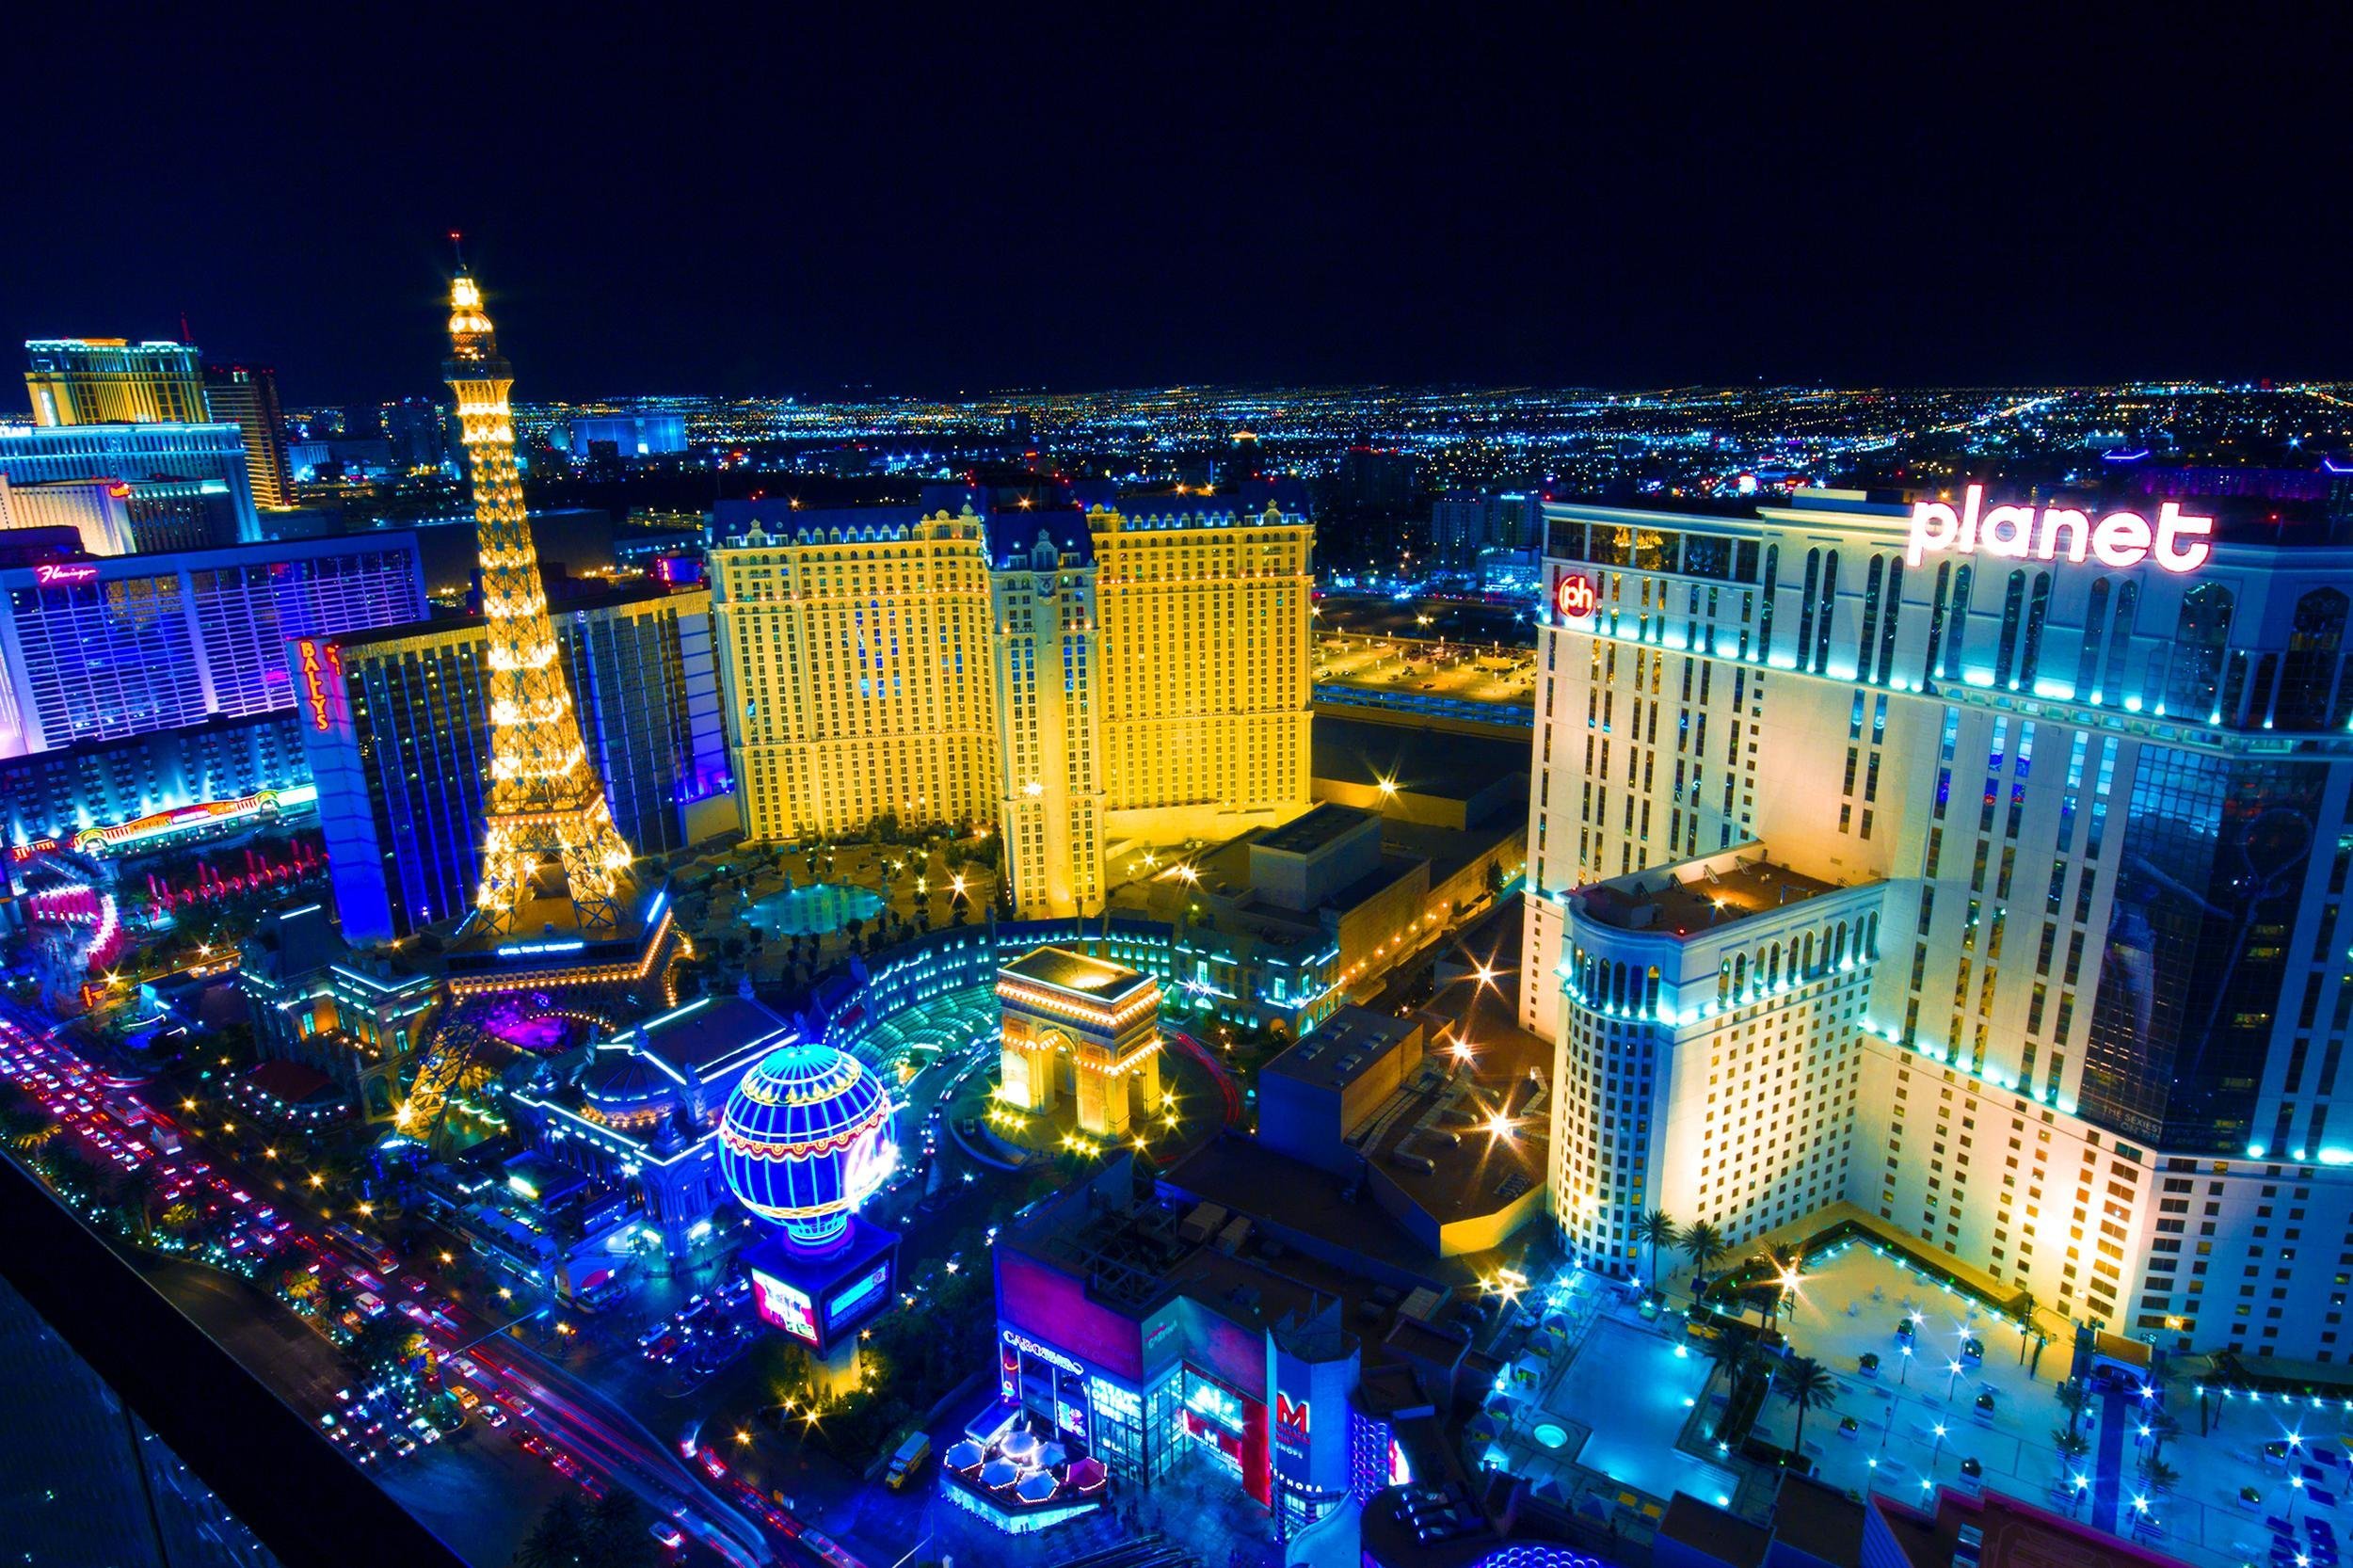 <p>Las Vegas is one of Nevada's most popular destinations, and for travelers with some self-control it's an inexpensive destination. Shows, drinks, and museums are <a href="https://www.cheapism.com/blog/3486/free-things-to-do-in-las-vegas">free or cheap in Vegas</a>. If you're not set on a specific hotel, even accommodations at the big names are relatively affordable.</p>